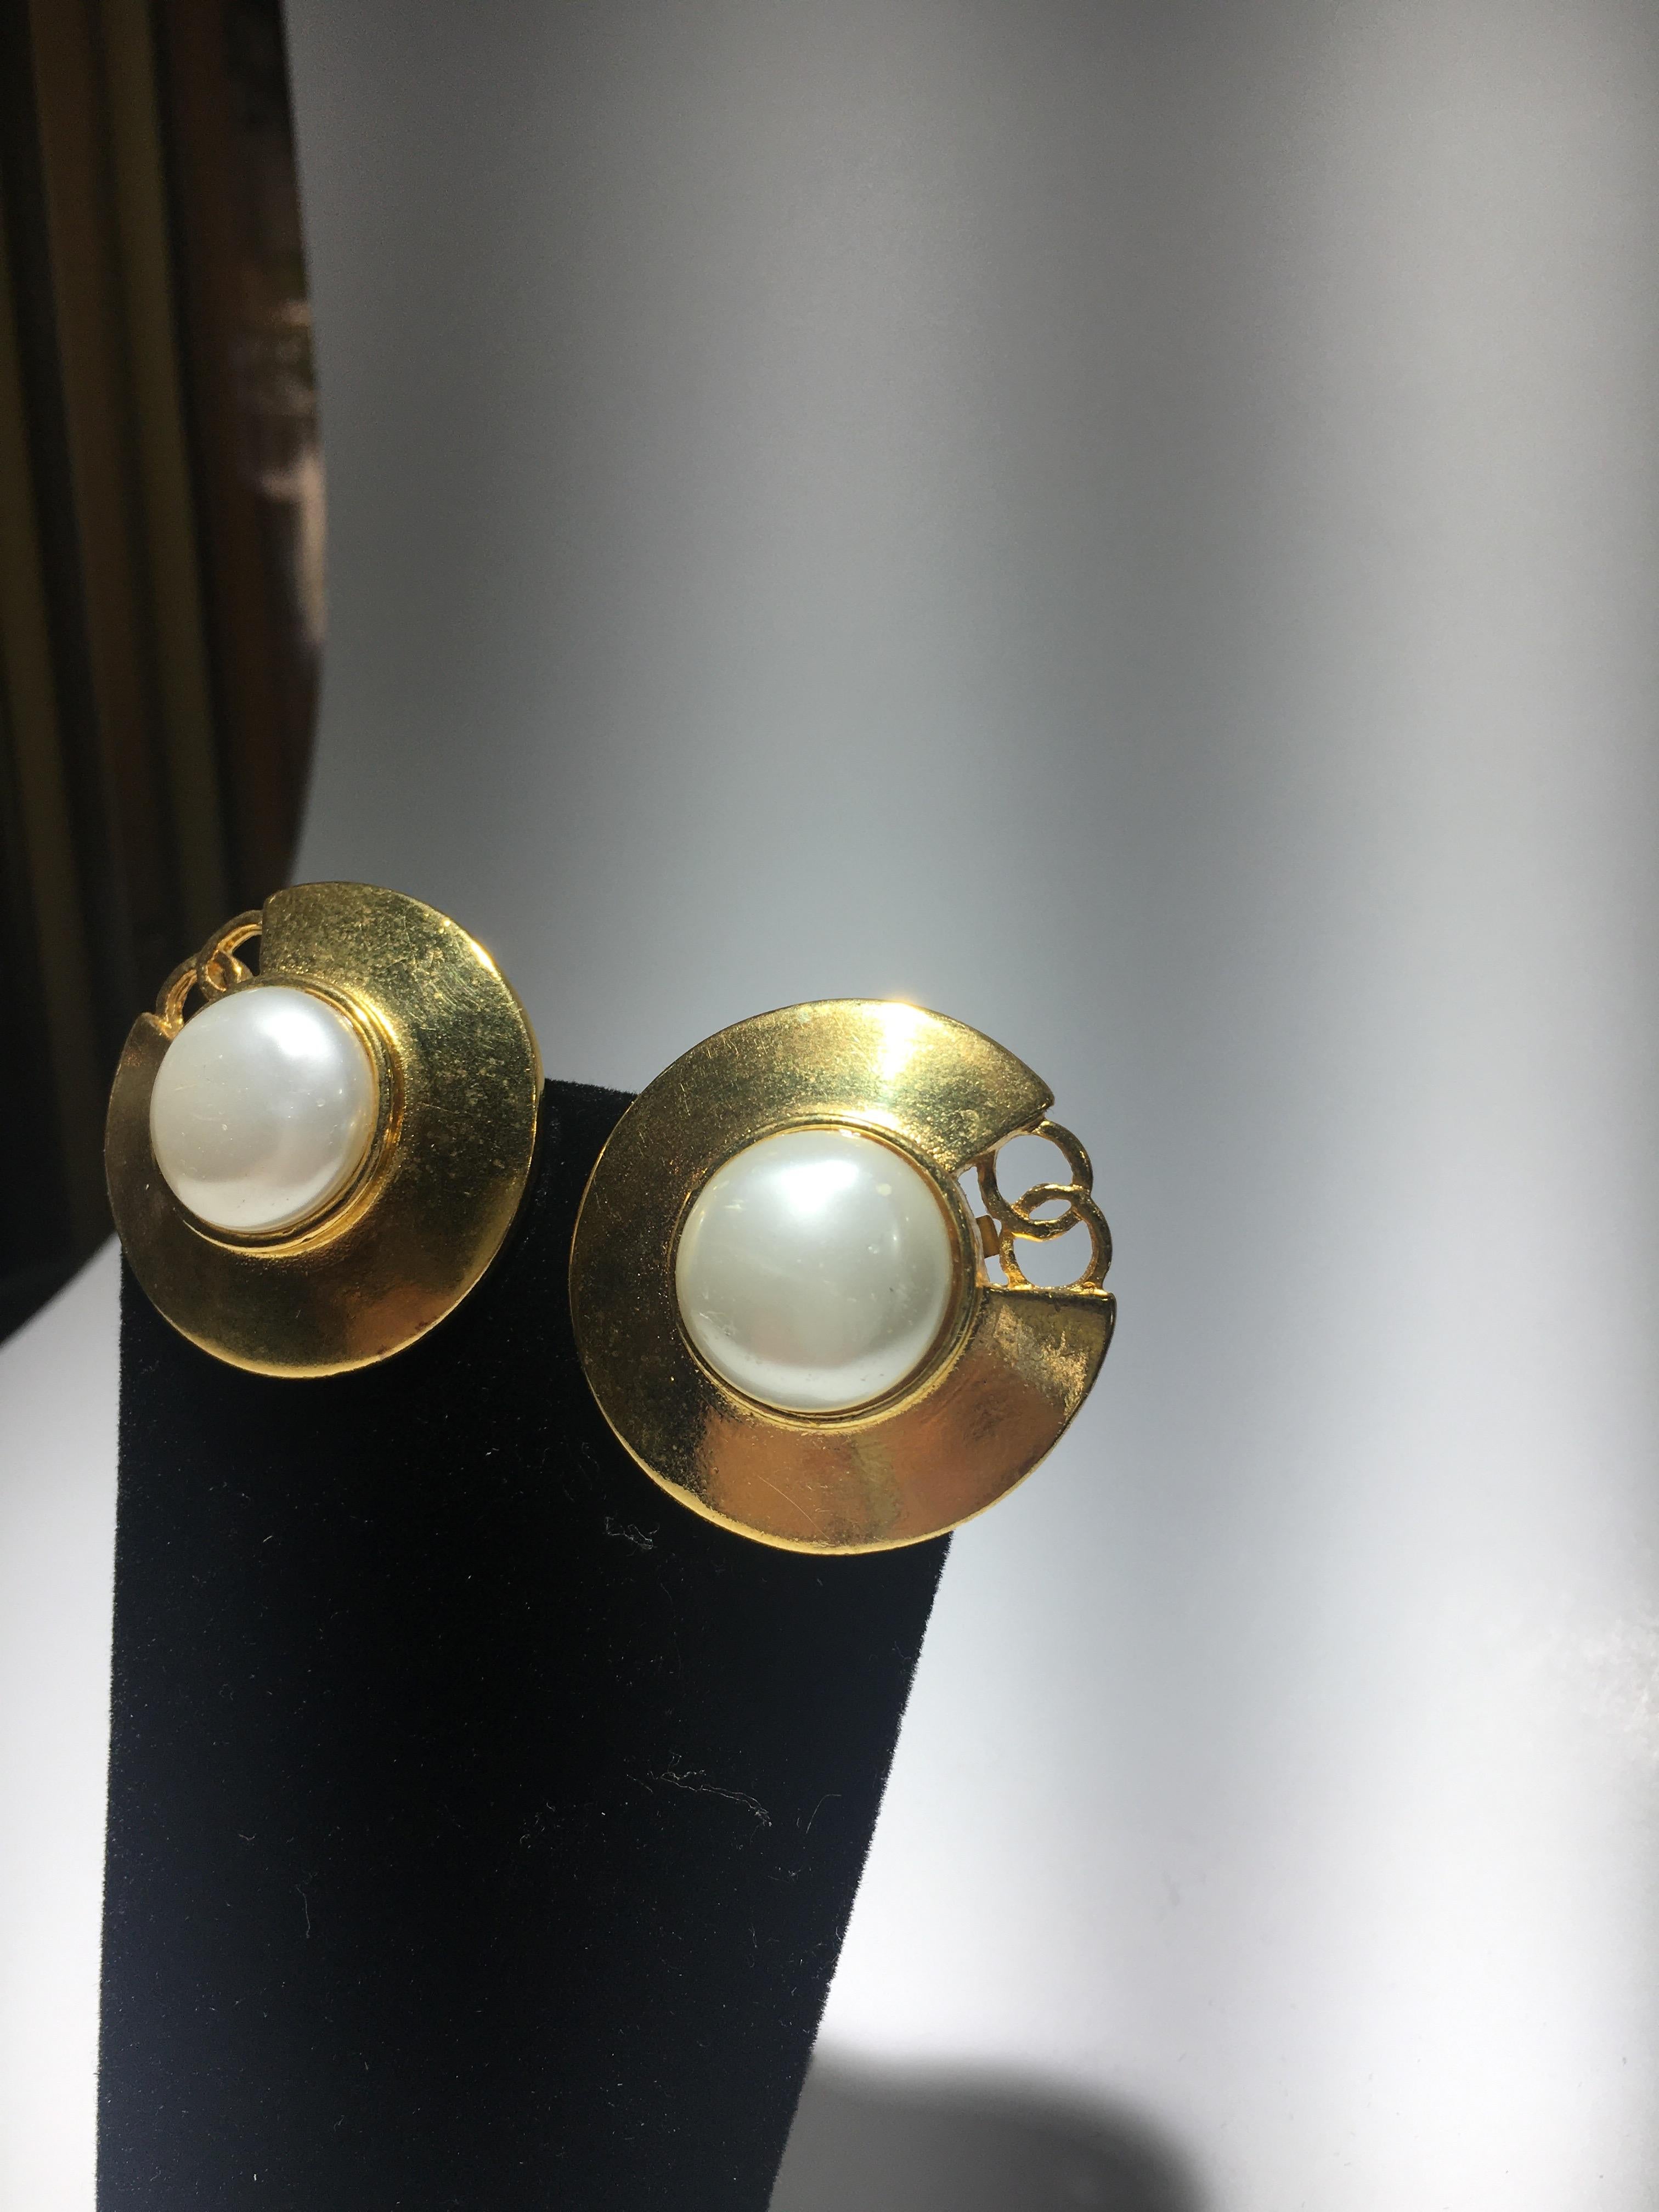 Chanel Gold And Mobe Pearl Earings With Signature Interlocking CC.  Great Scale.  Feel free to call as we have a nice selection of Chanel.